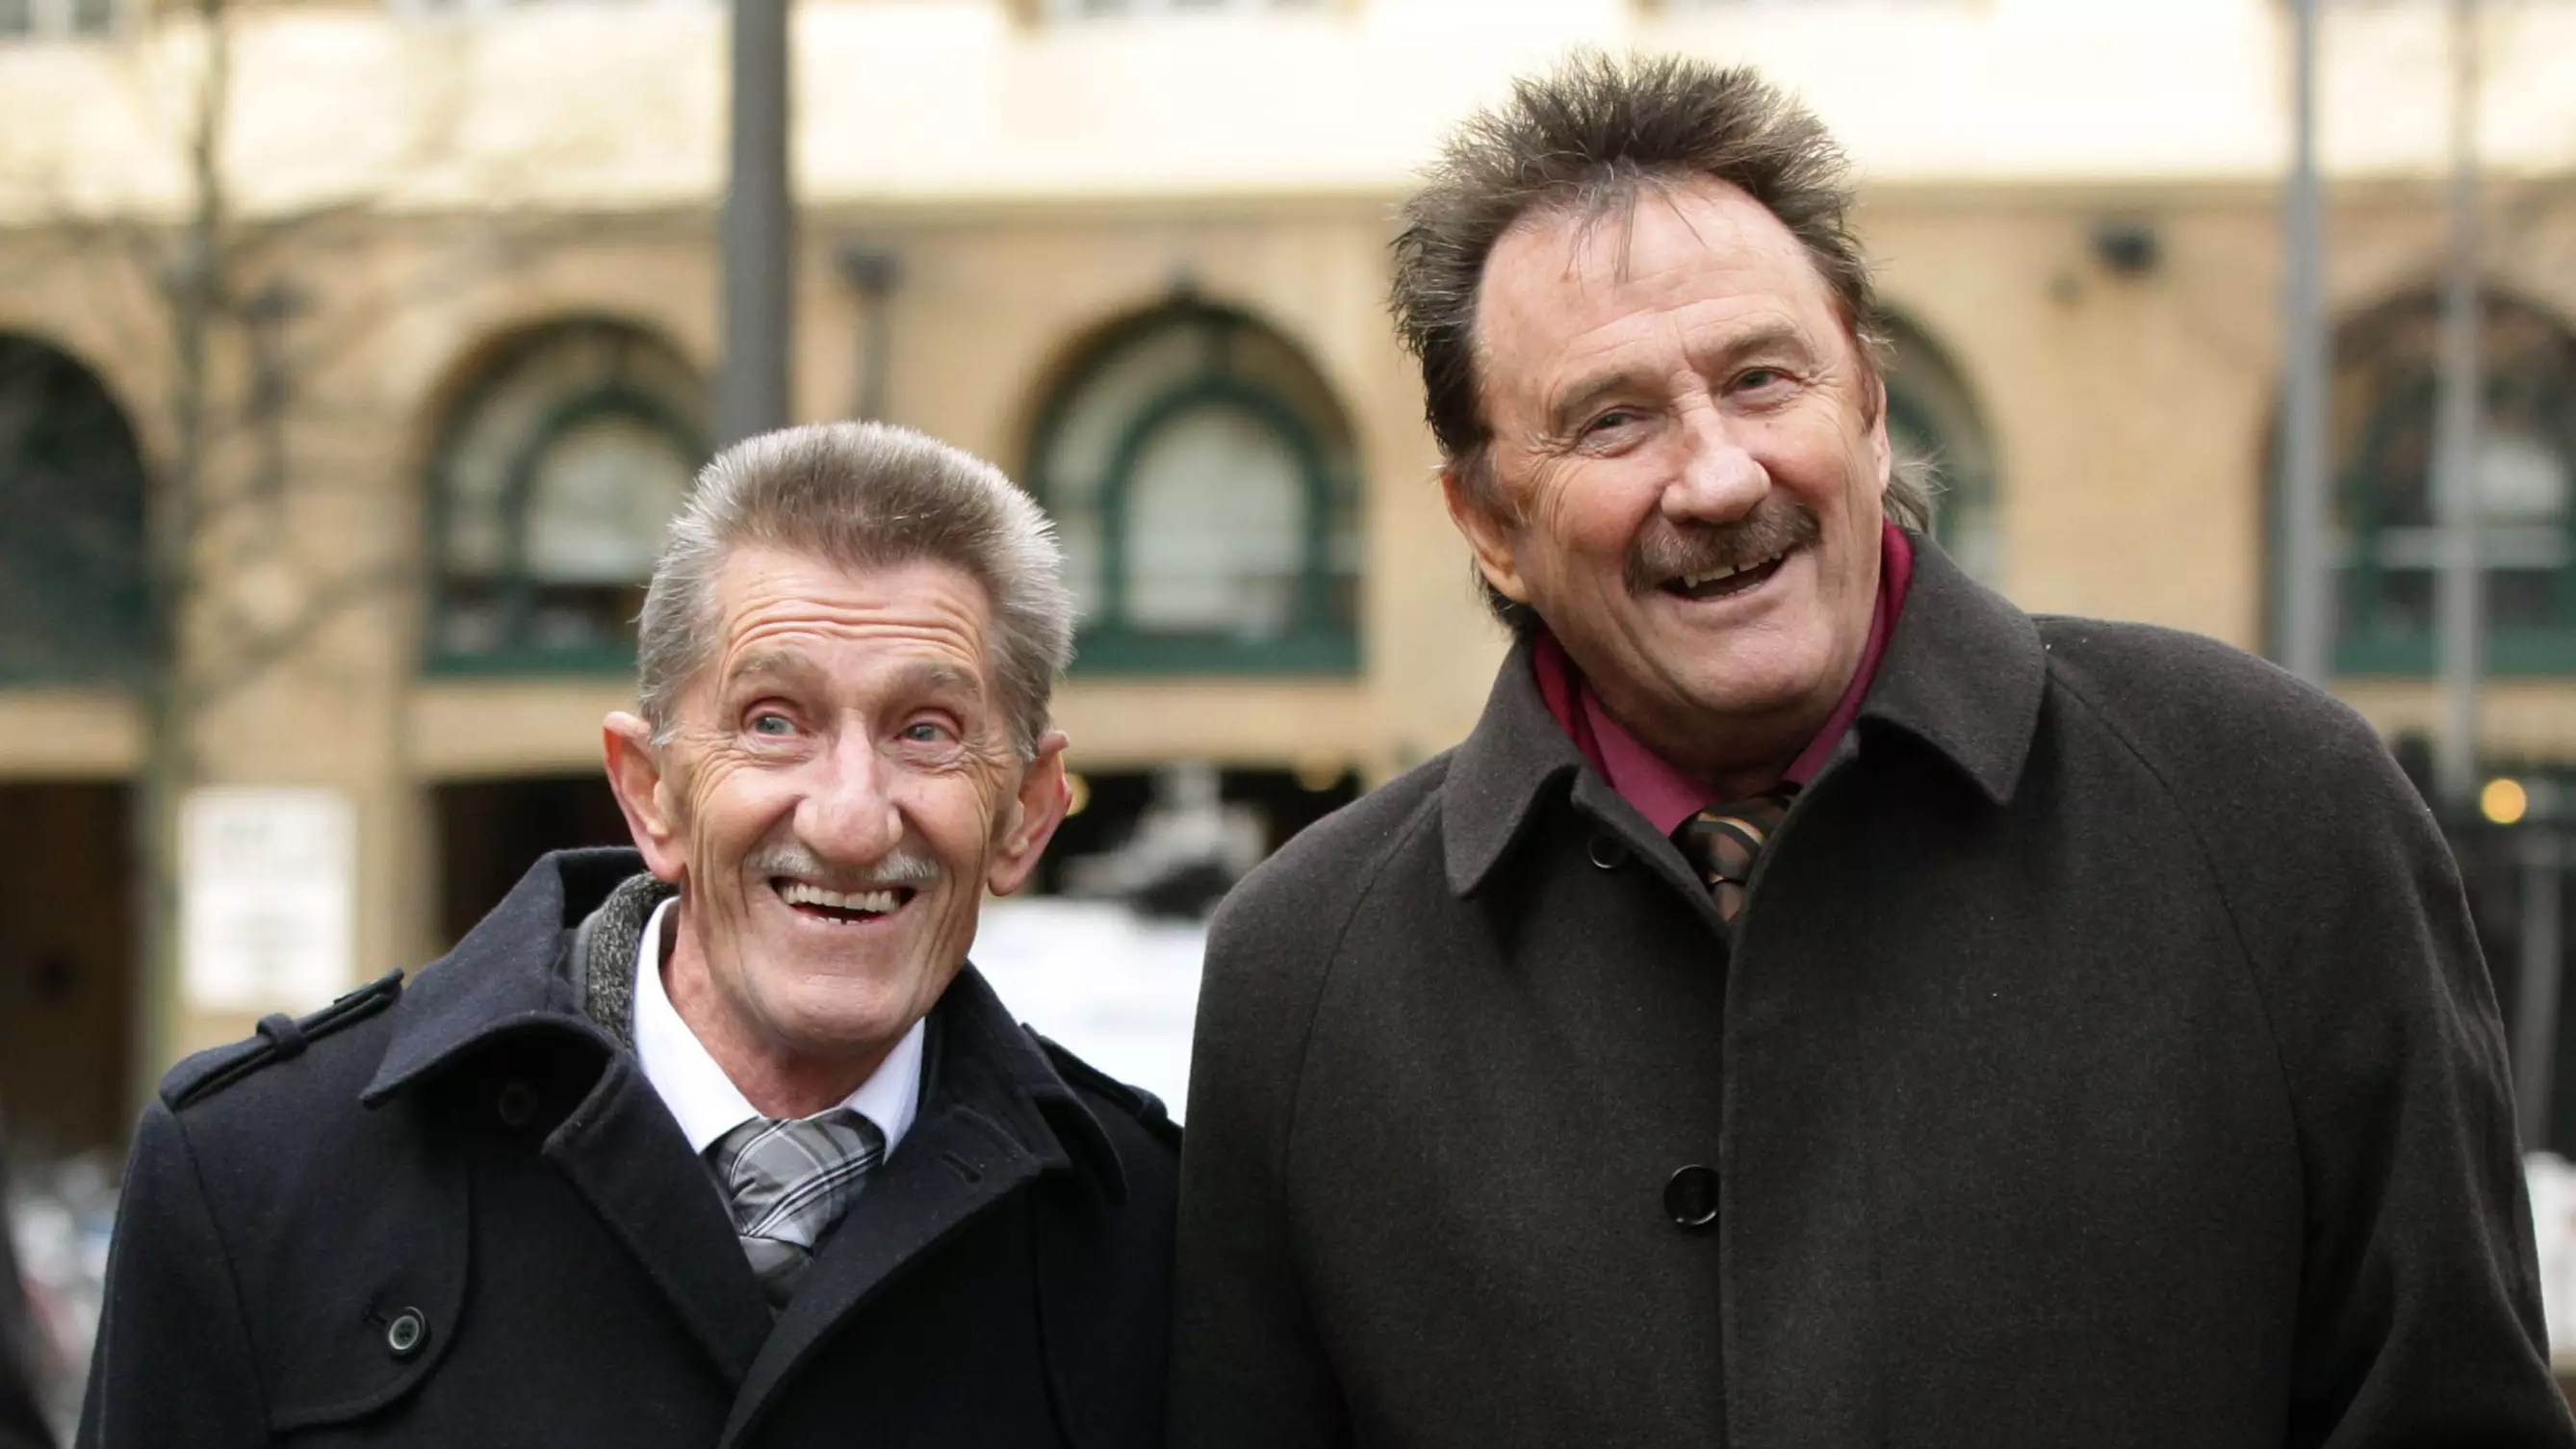 Paul Chuckle Thanks Fans For Kind Wishes After Barry Chuckle's Death